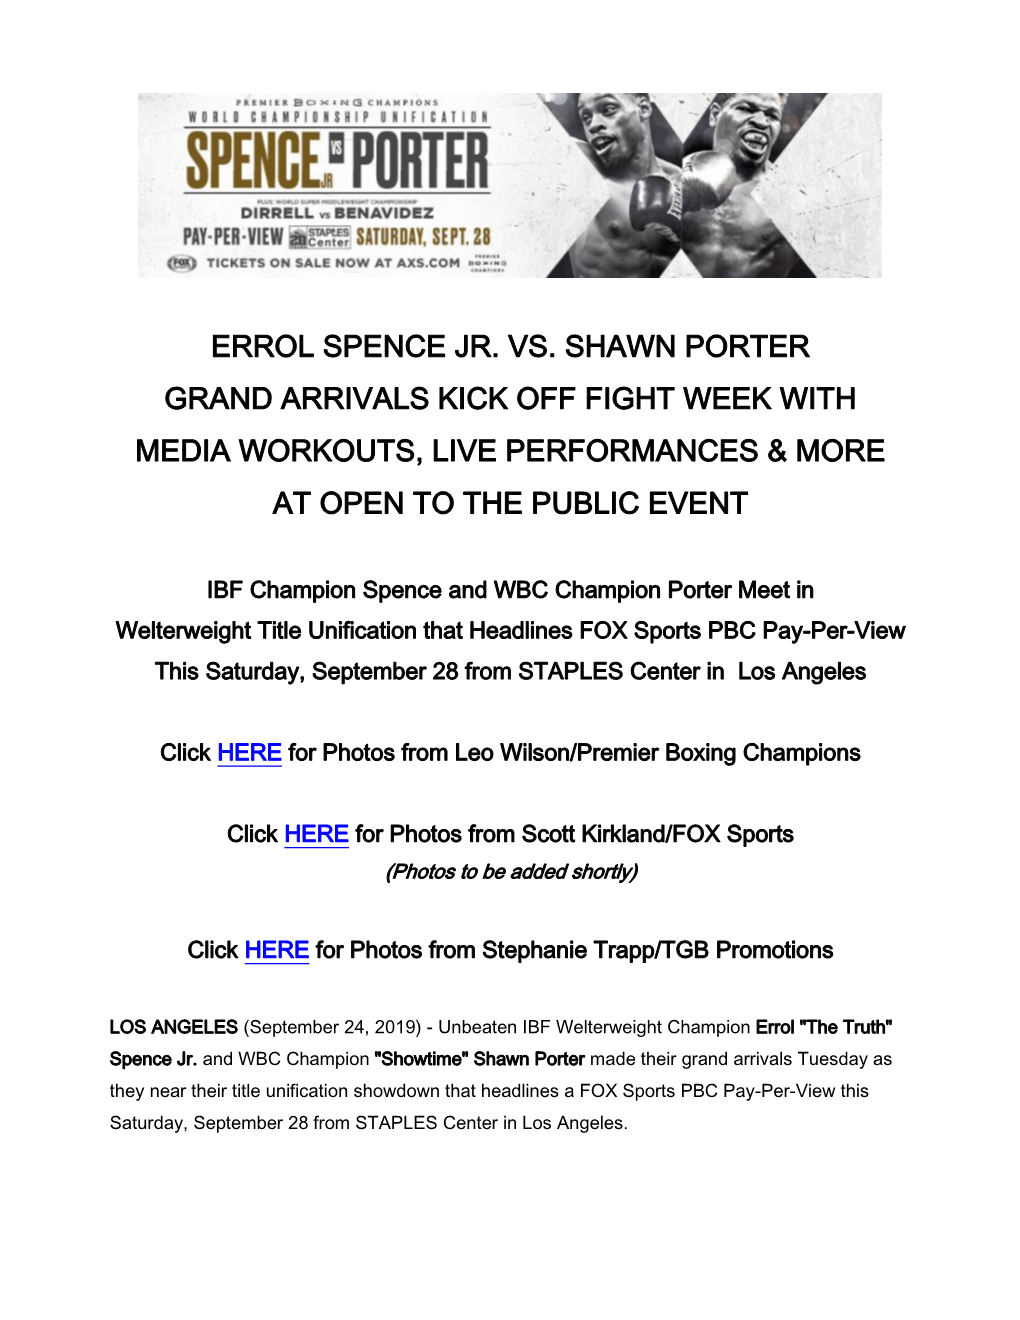 Errol Spence Jr. Vs. Shawn Porter Grand Arrivals Kick Off Fight Week with Media Workouts, Live Performances & More at Open to the Public Event